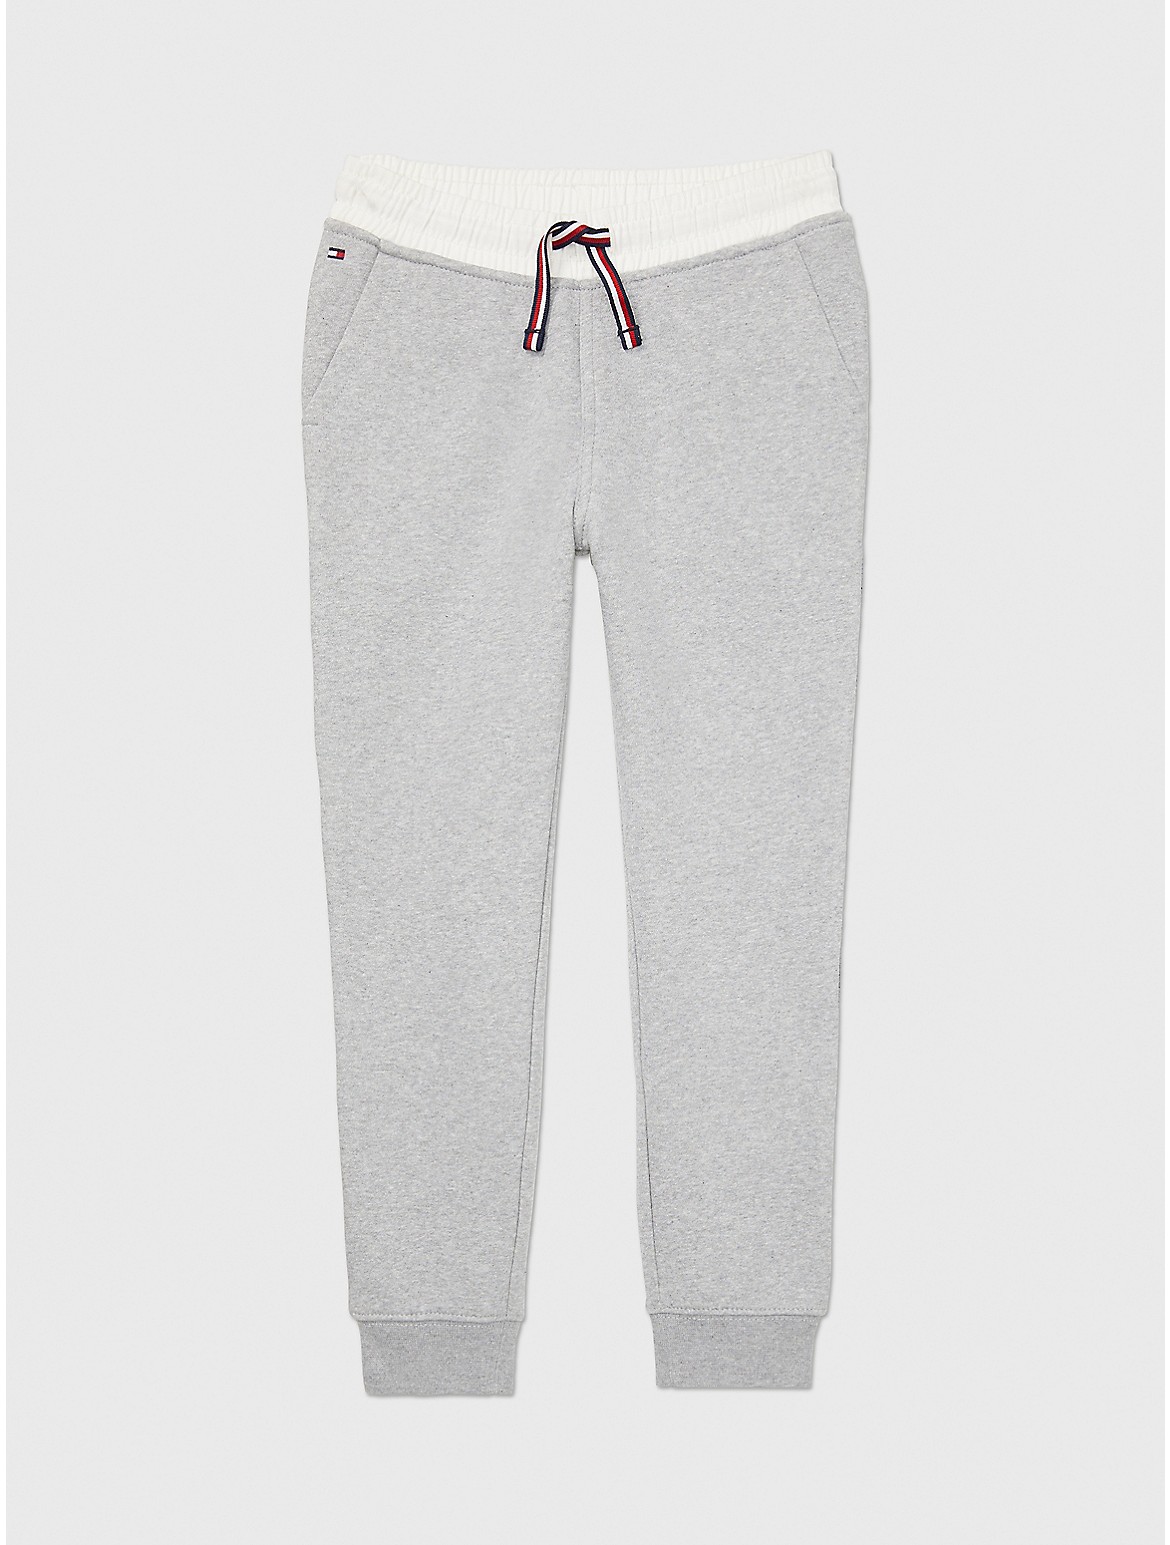 Tommy Hilfiger Boys' Solid Jogger Pant - Grey - XS